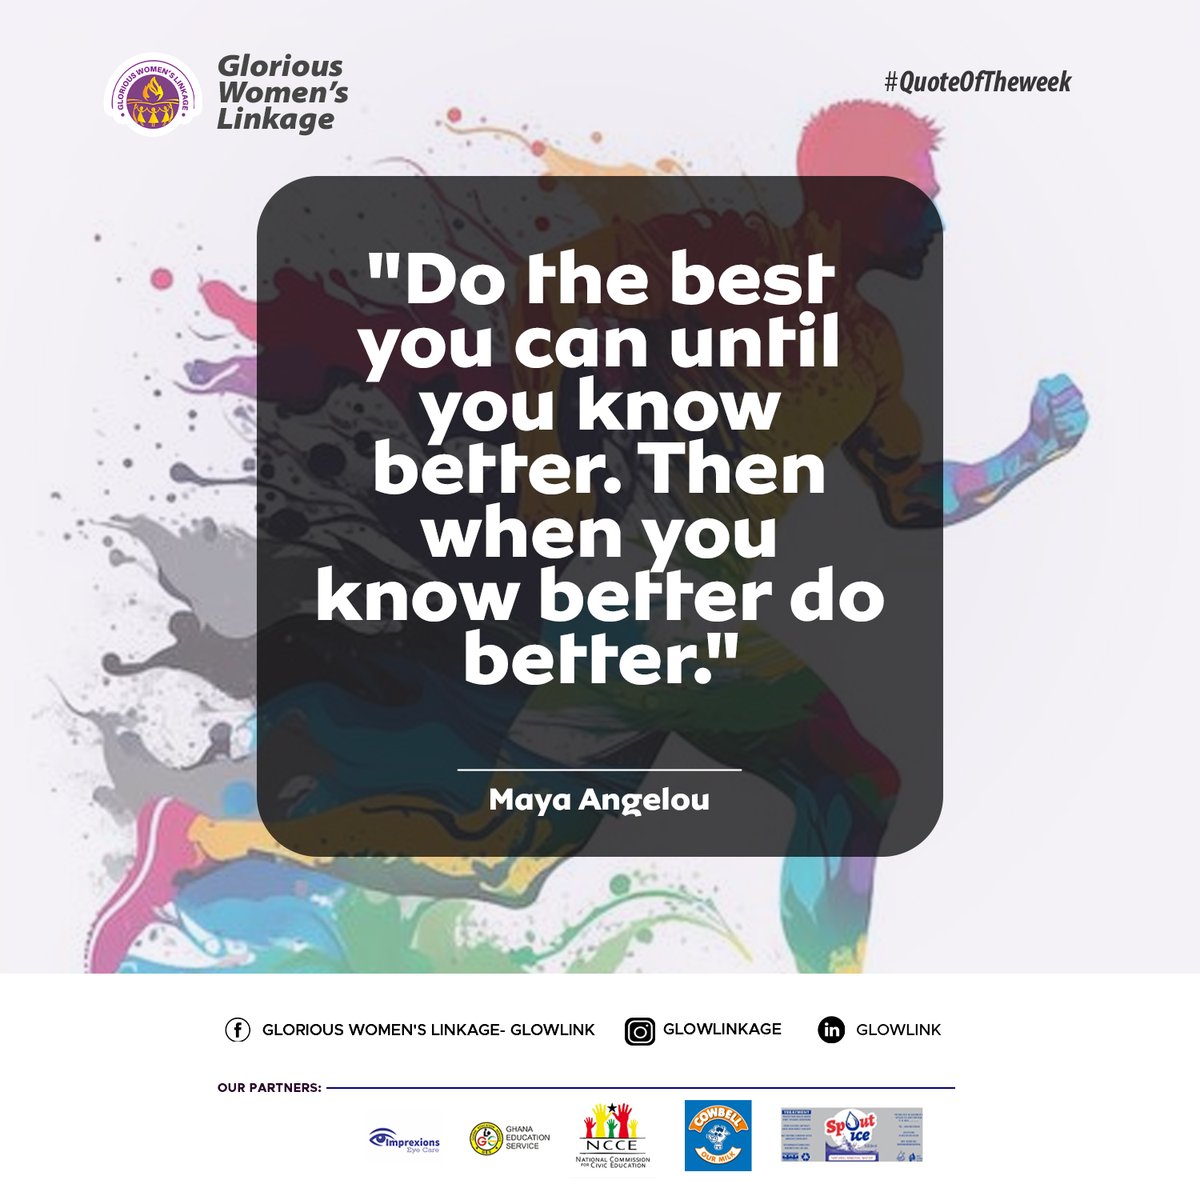 'Do the best you can until you know better. Then when you know better do better.'
@Maya Angelou
#GLOWLINK #DoBetter #ContinuousImprovement #ProgressOverPerfection #GrowthMindset #EvolveAndAdapt